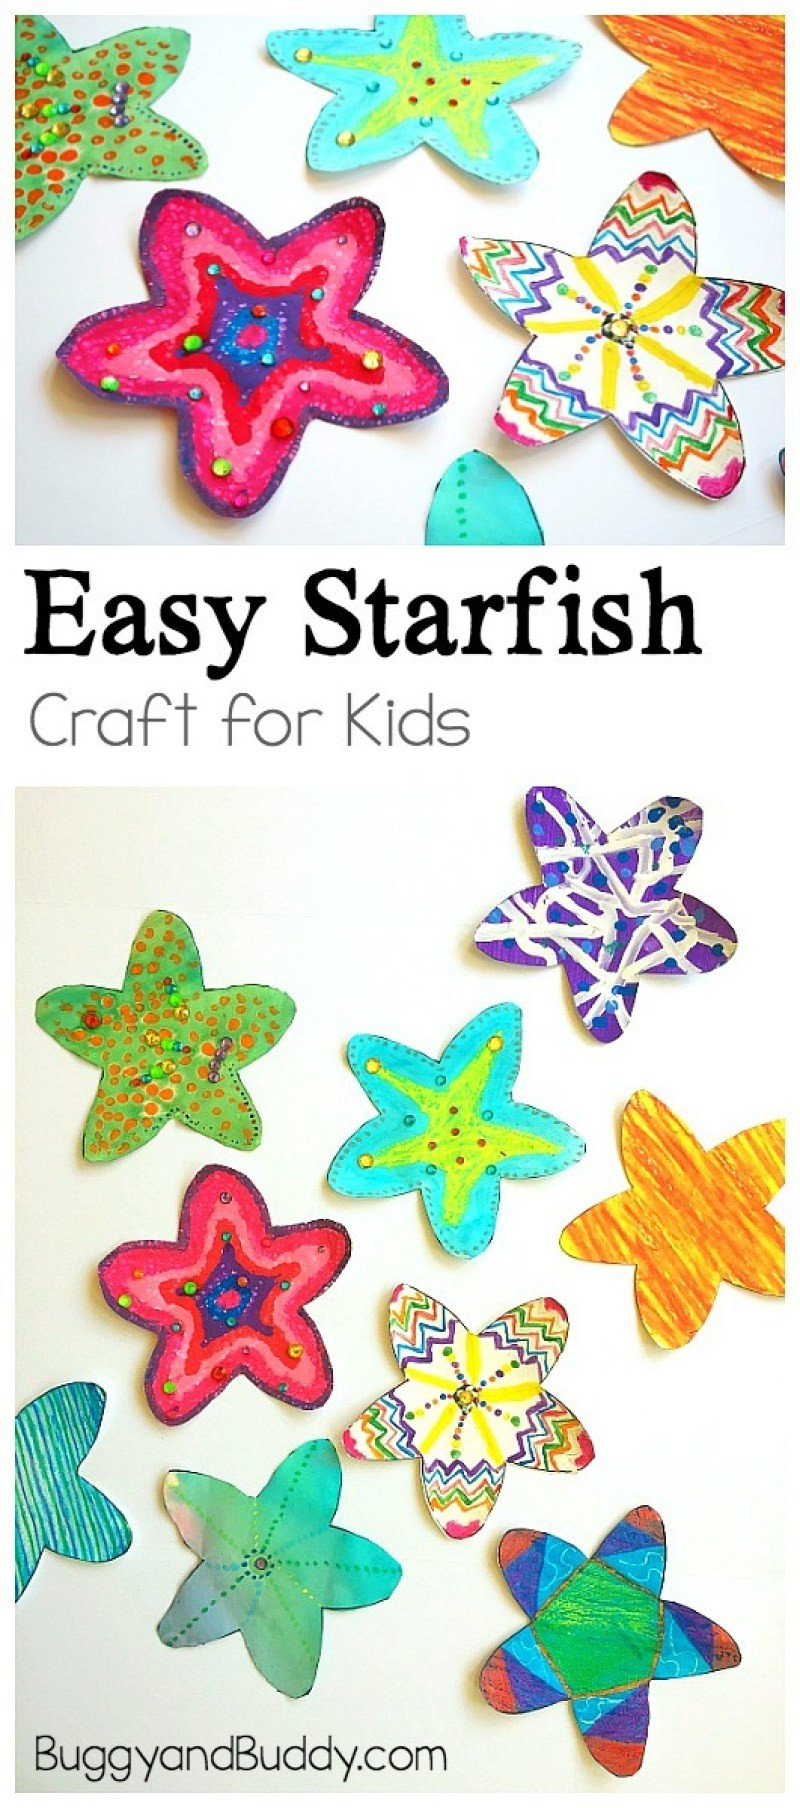 Summer Crafts For Children
 12 Favorite Easy Summer Crafts for Kids on Love the Day